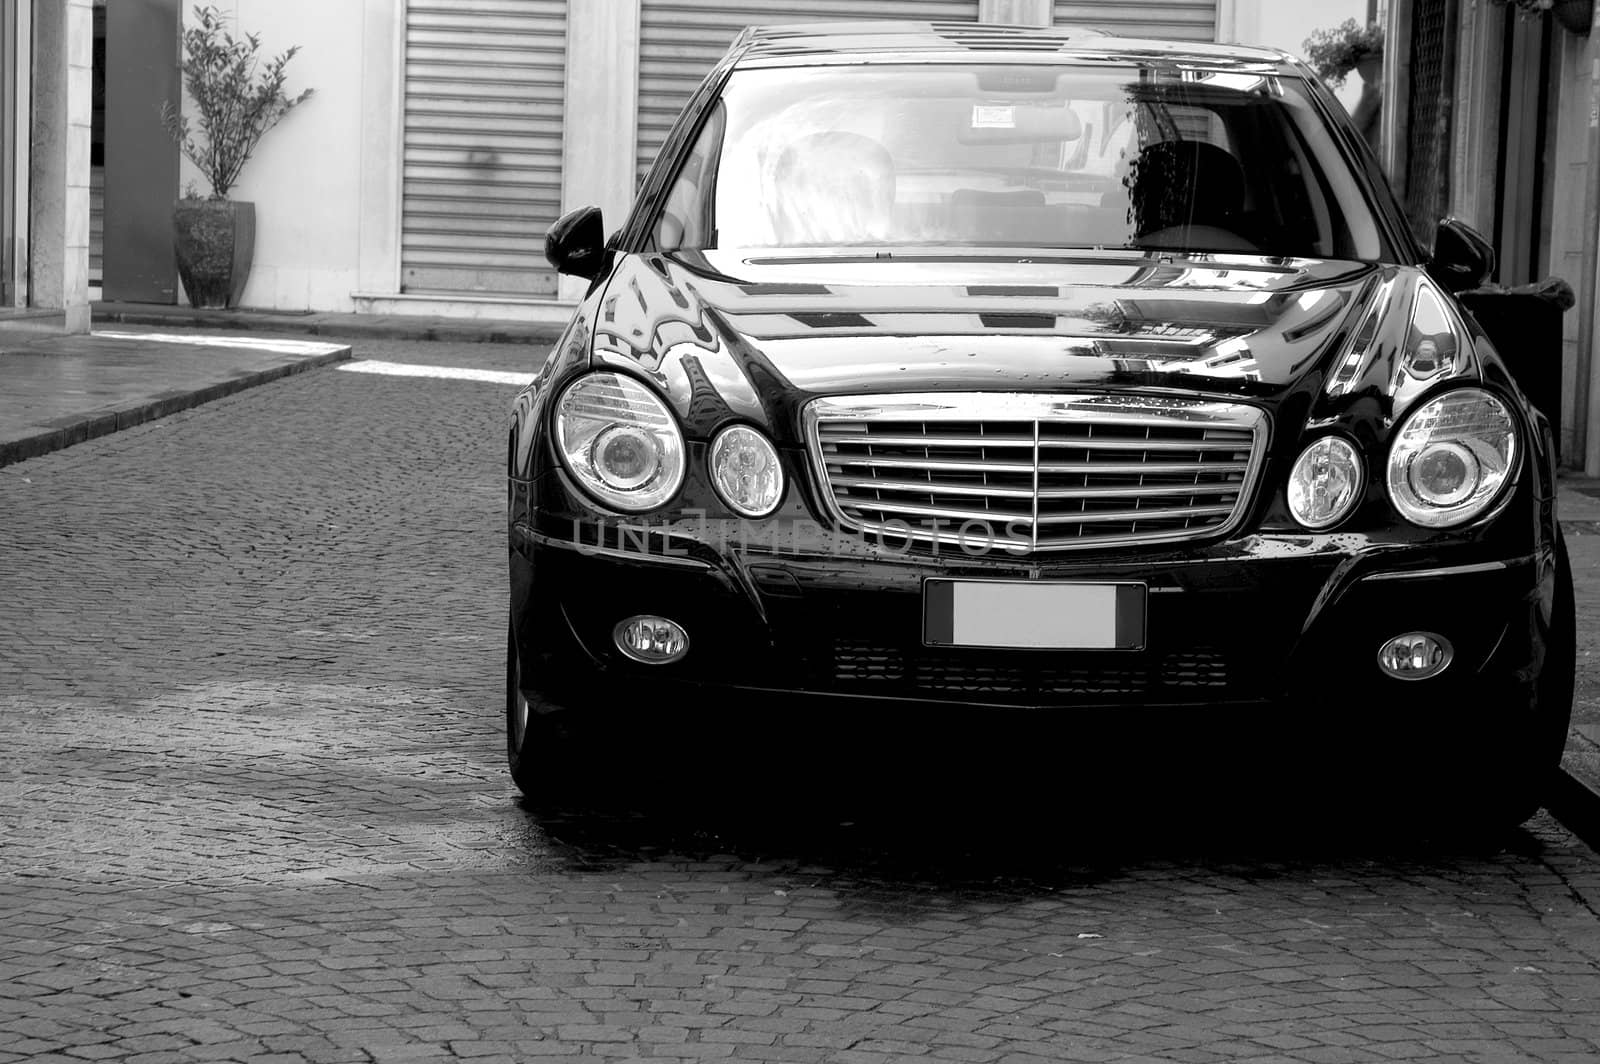 A luxury vehicle in Florence, Italy.